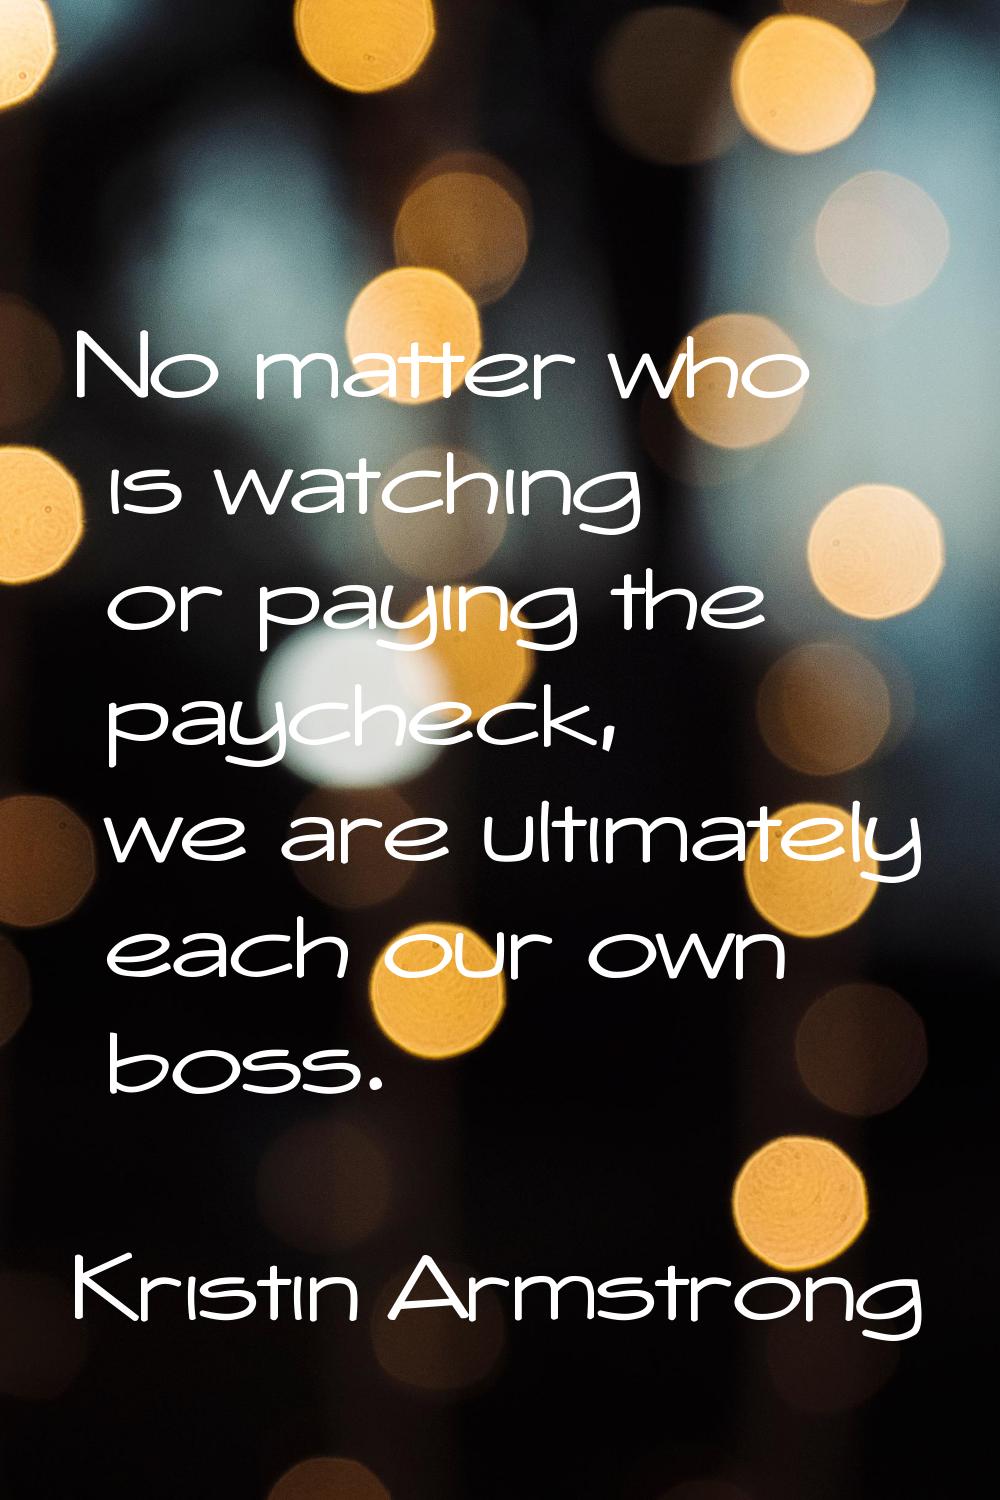 No matter who is watching or paying the paycheck, we are ultimately each our own boss.